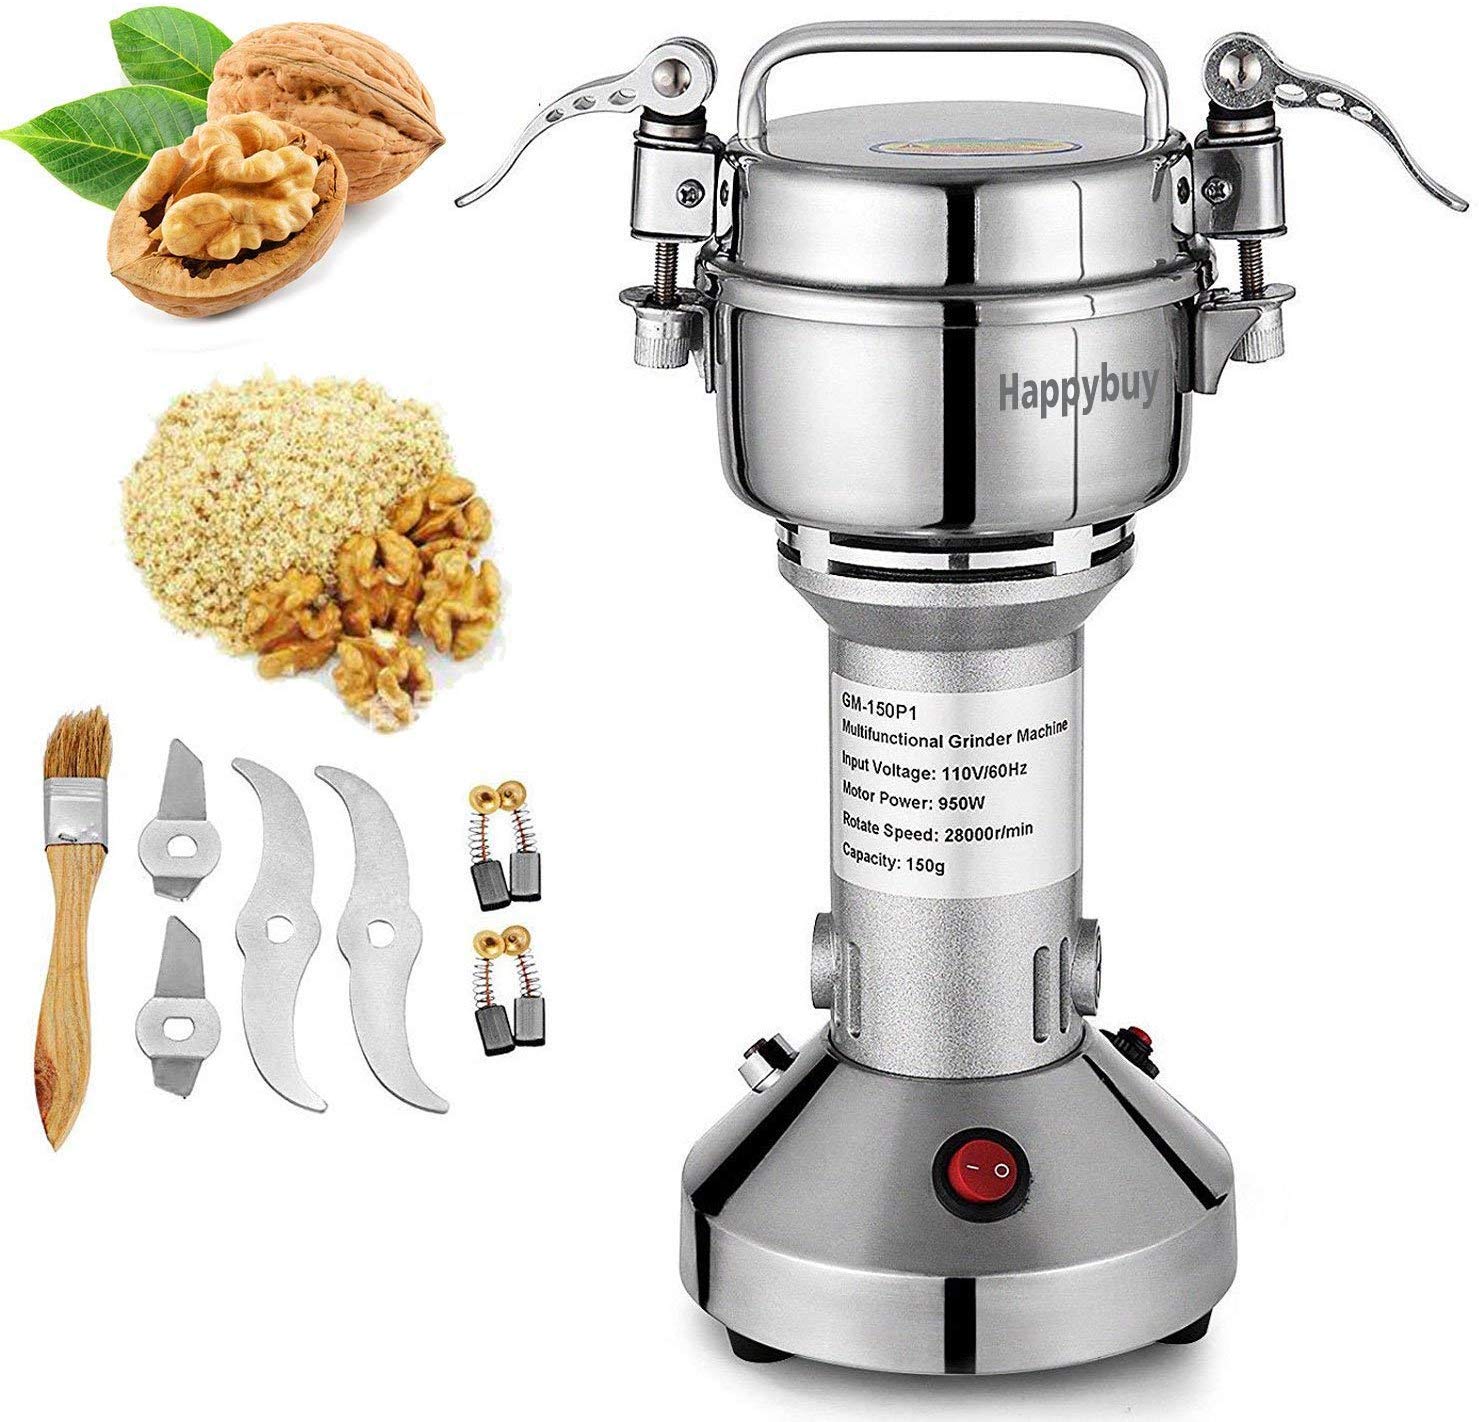 Review of Happybuy Electric Grain Grinder 1000g Pulverizer Grinding Machine 2800W Mill Grinder